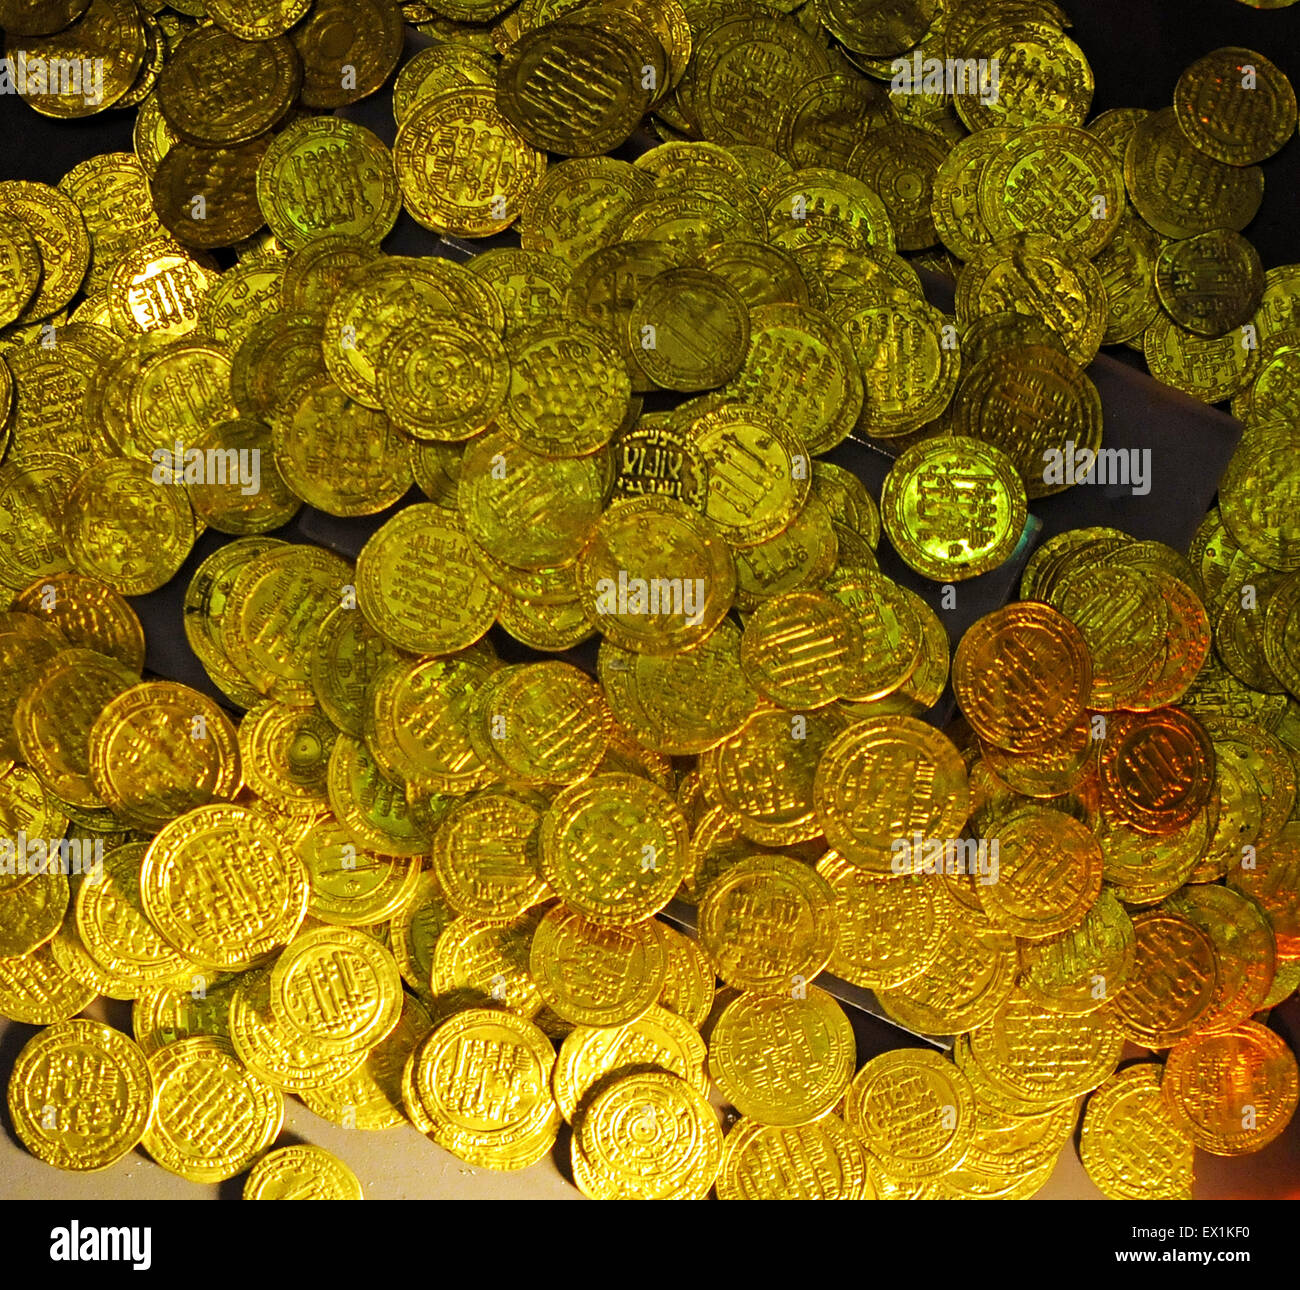 Treasure  of old coins Stock Photo